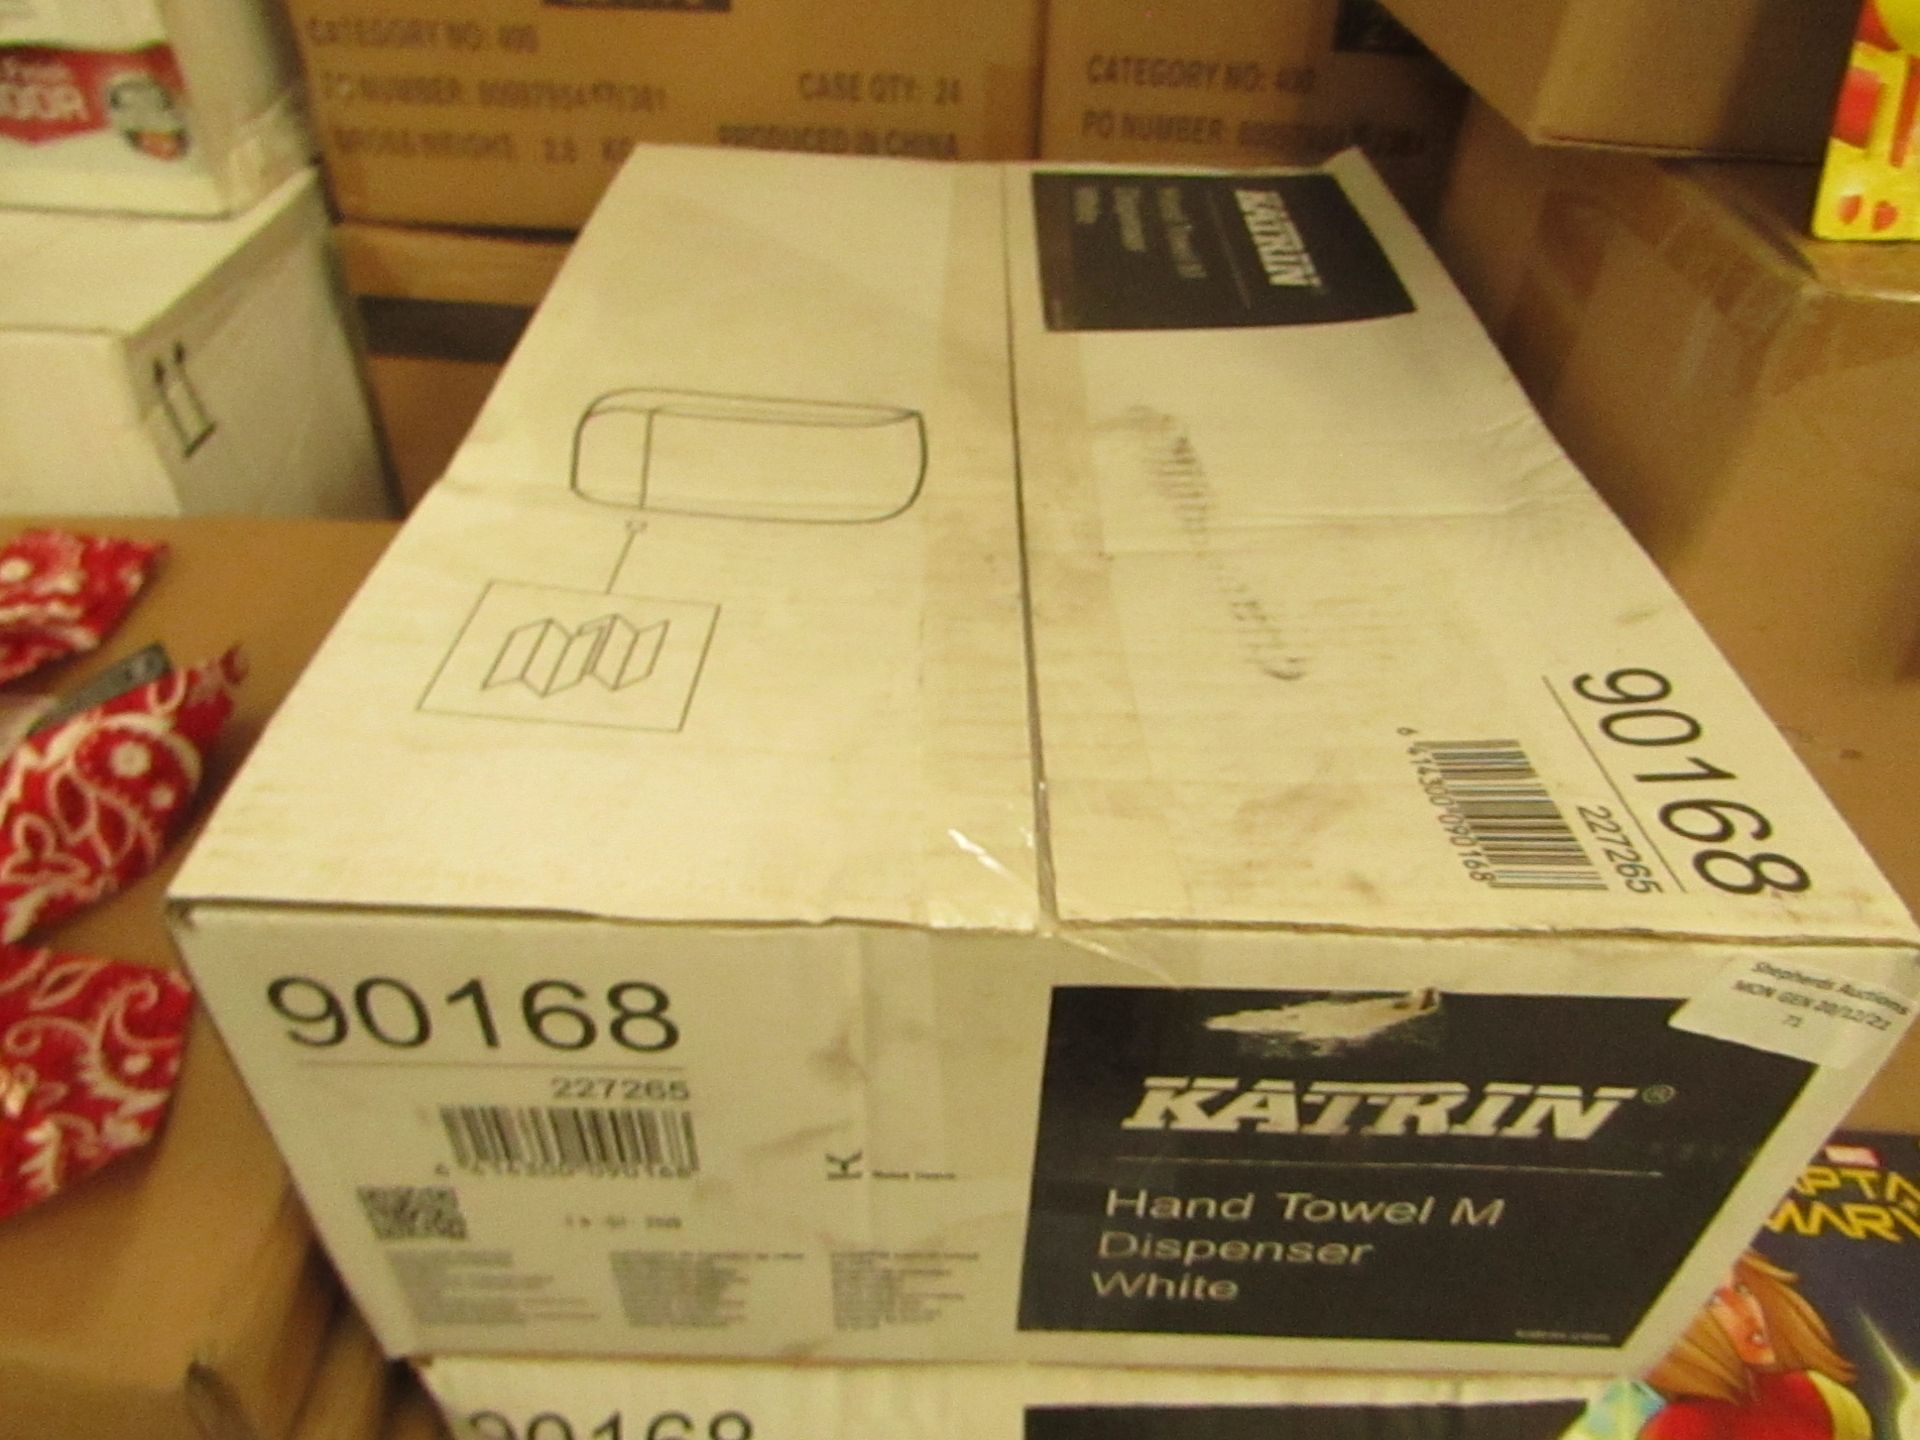 2x Katrin - Hand Towel M Dispenser White - Unchecked & Boxed.